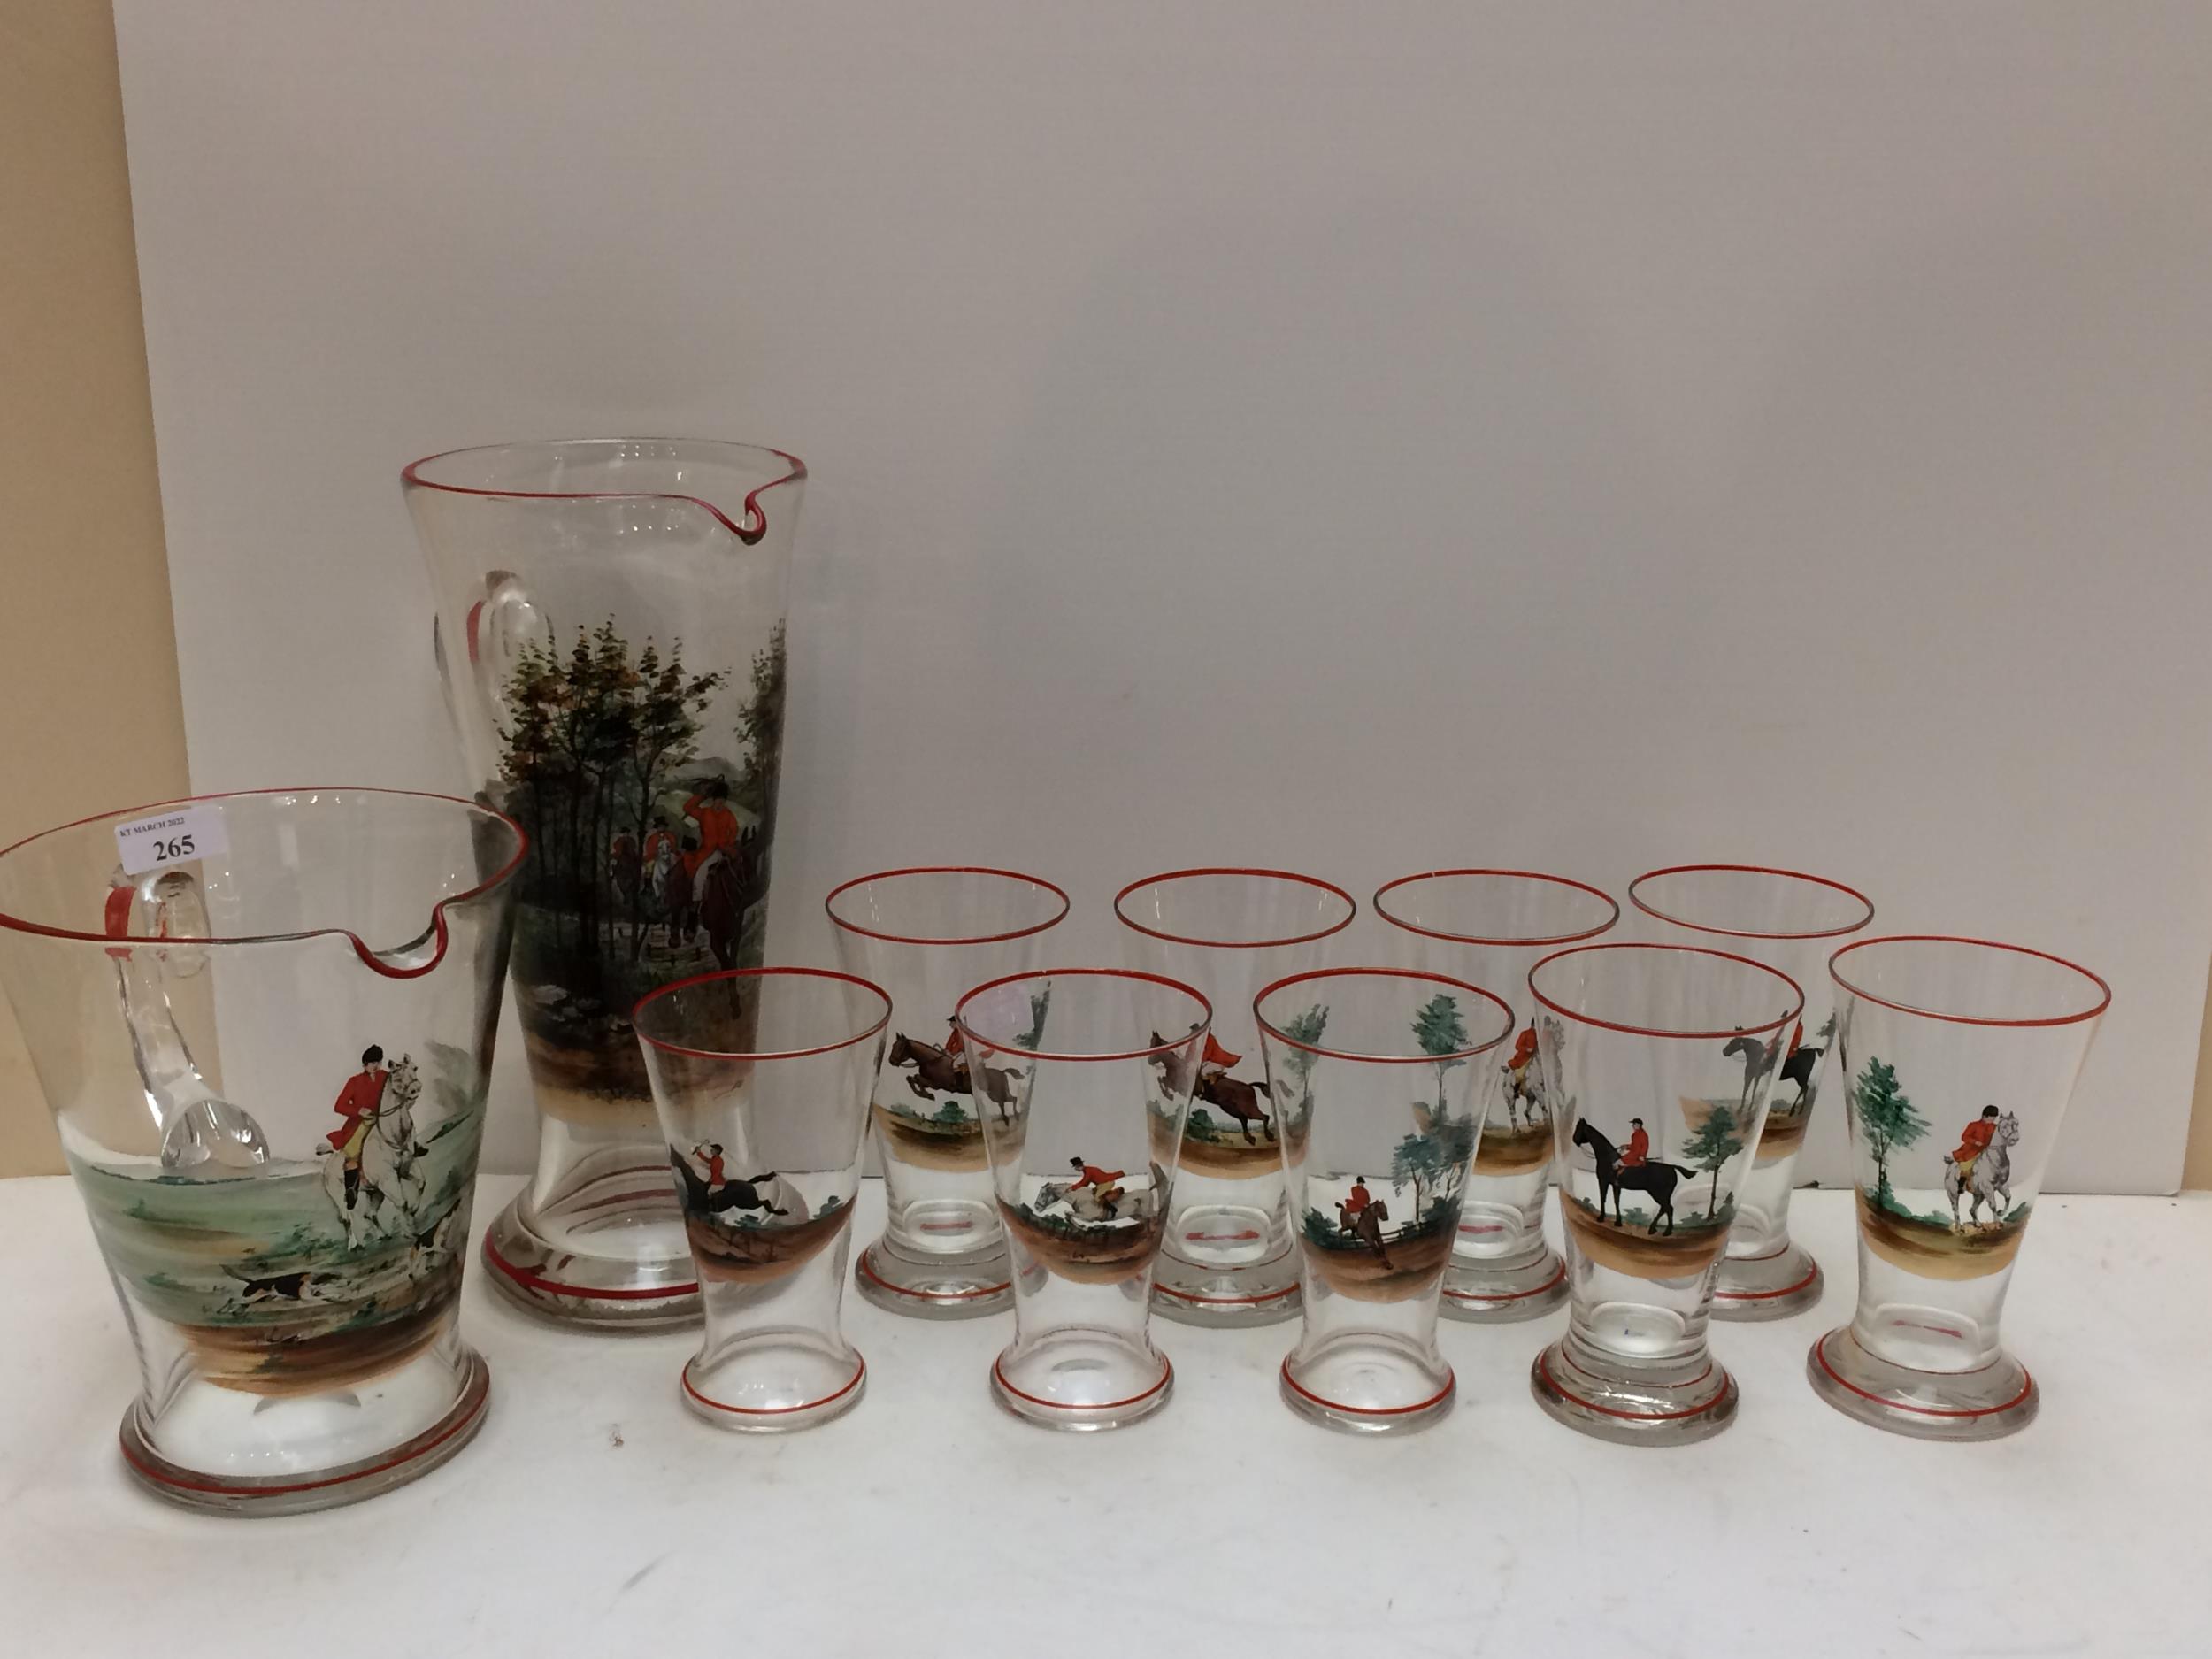 A vintage, decorative hunting themed glass set comprising a tall lemonade jug, a wide Pimm's jug and